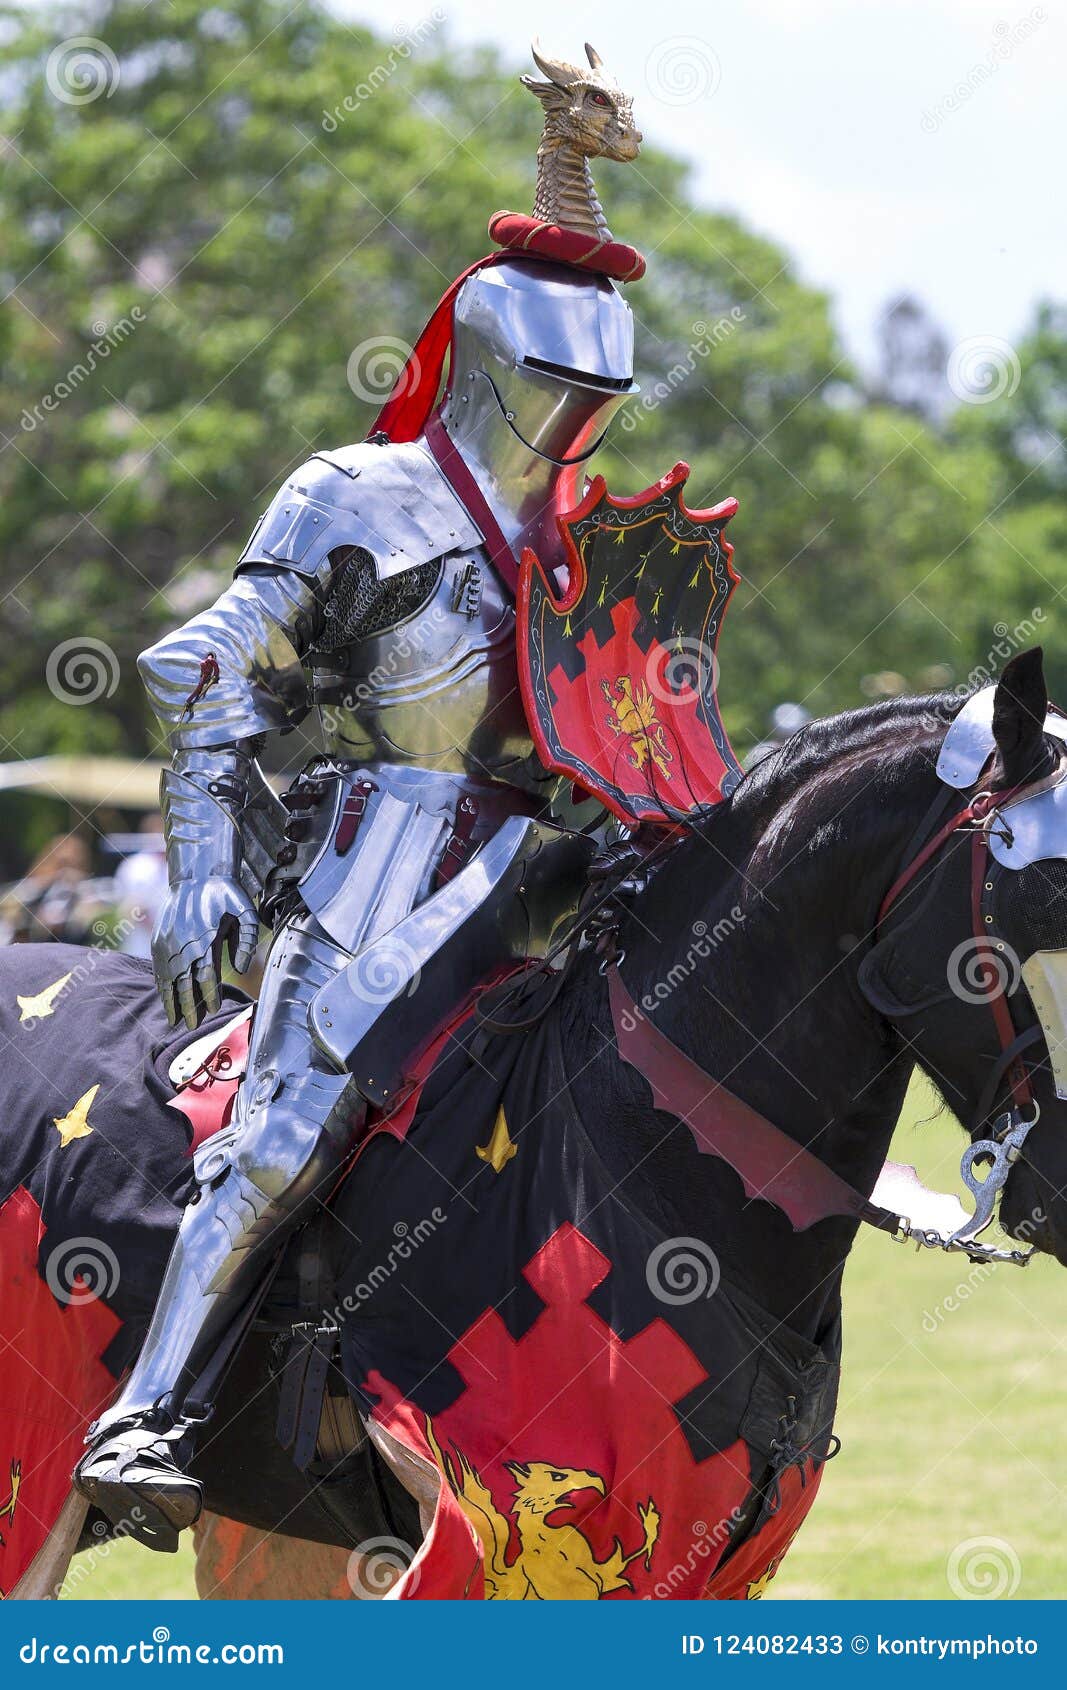 A Knight during Medieval Jousting Tournament Stock Image - Image of